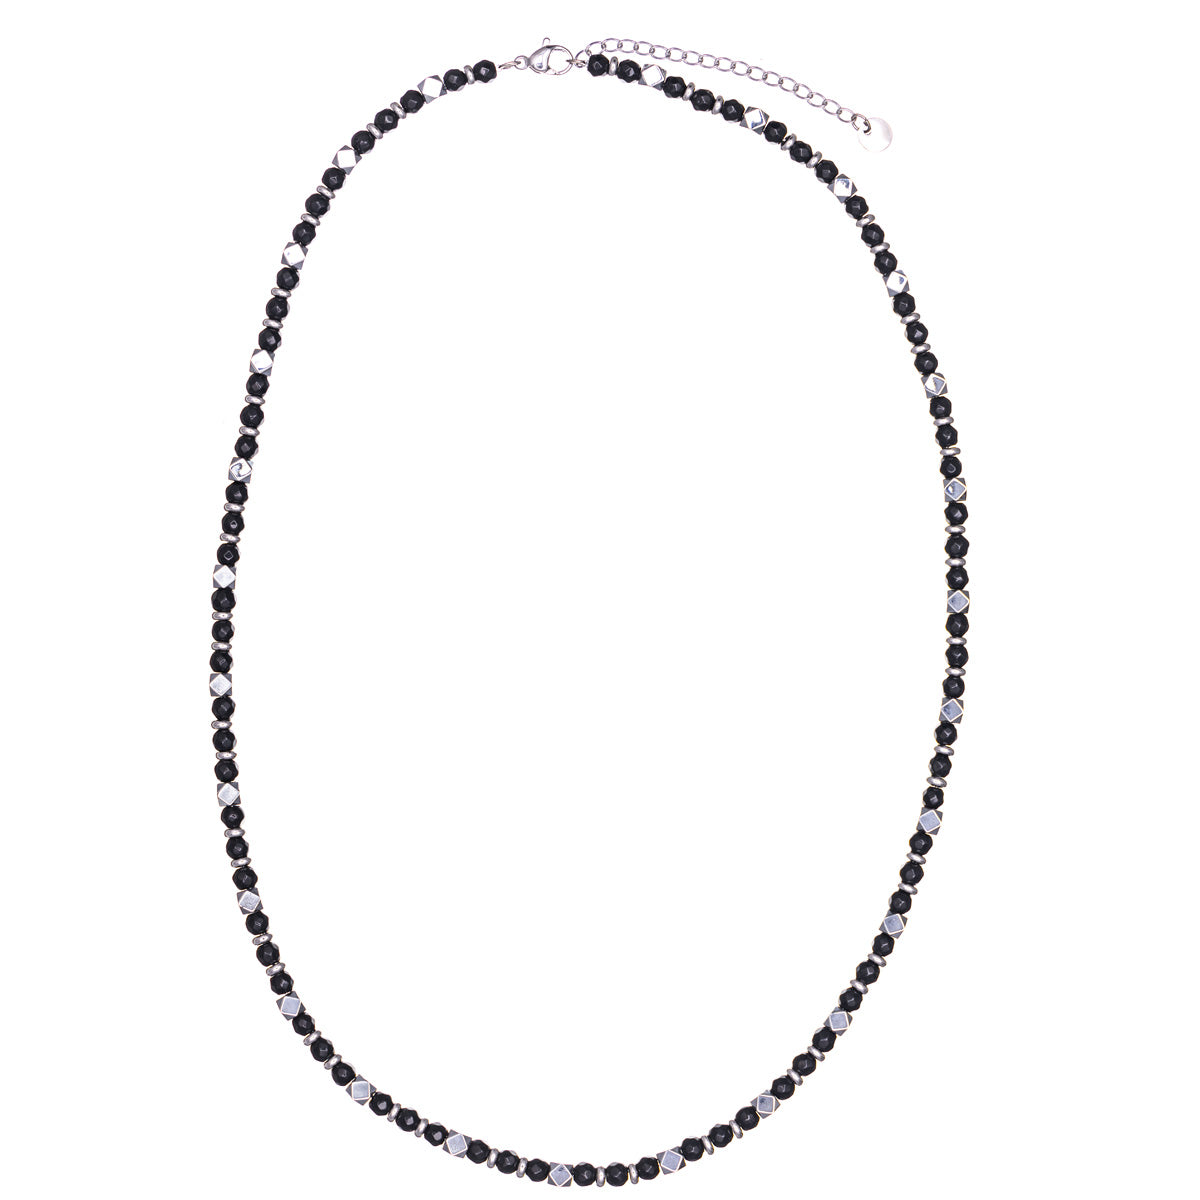 Steel glass bead necklace with steel chain 50cm +5cm (Steel 316L)